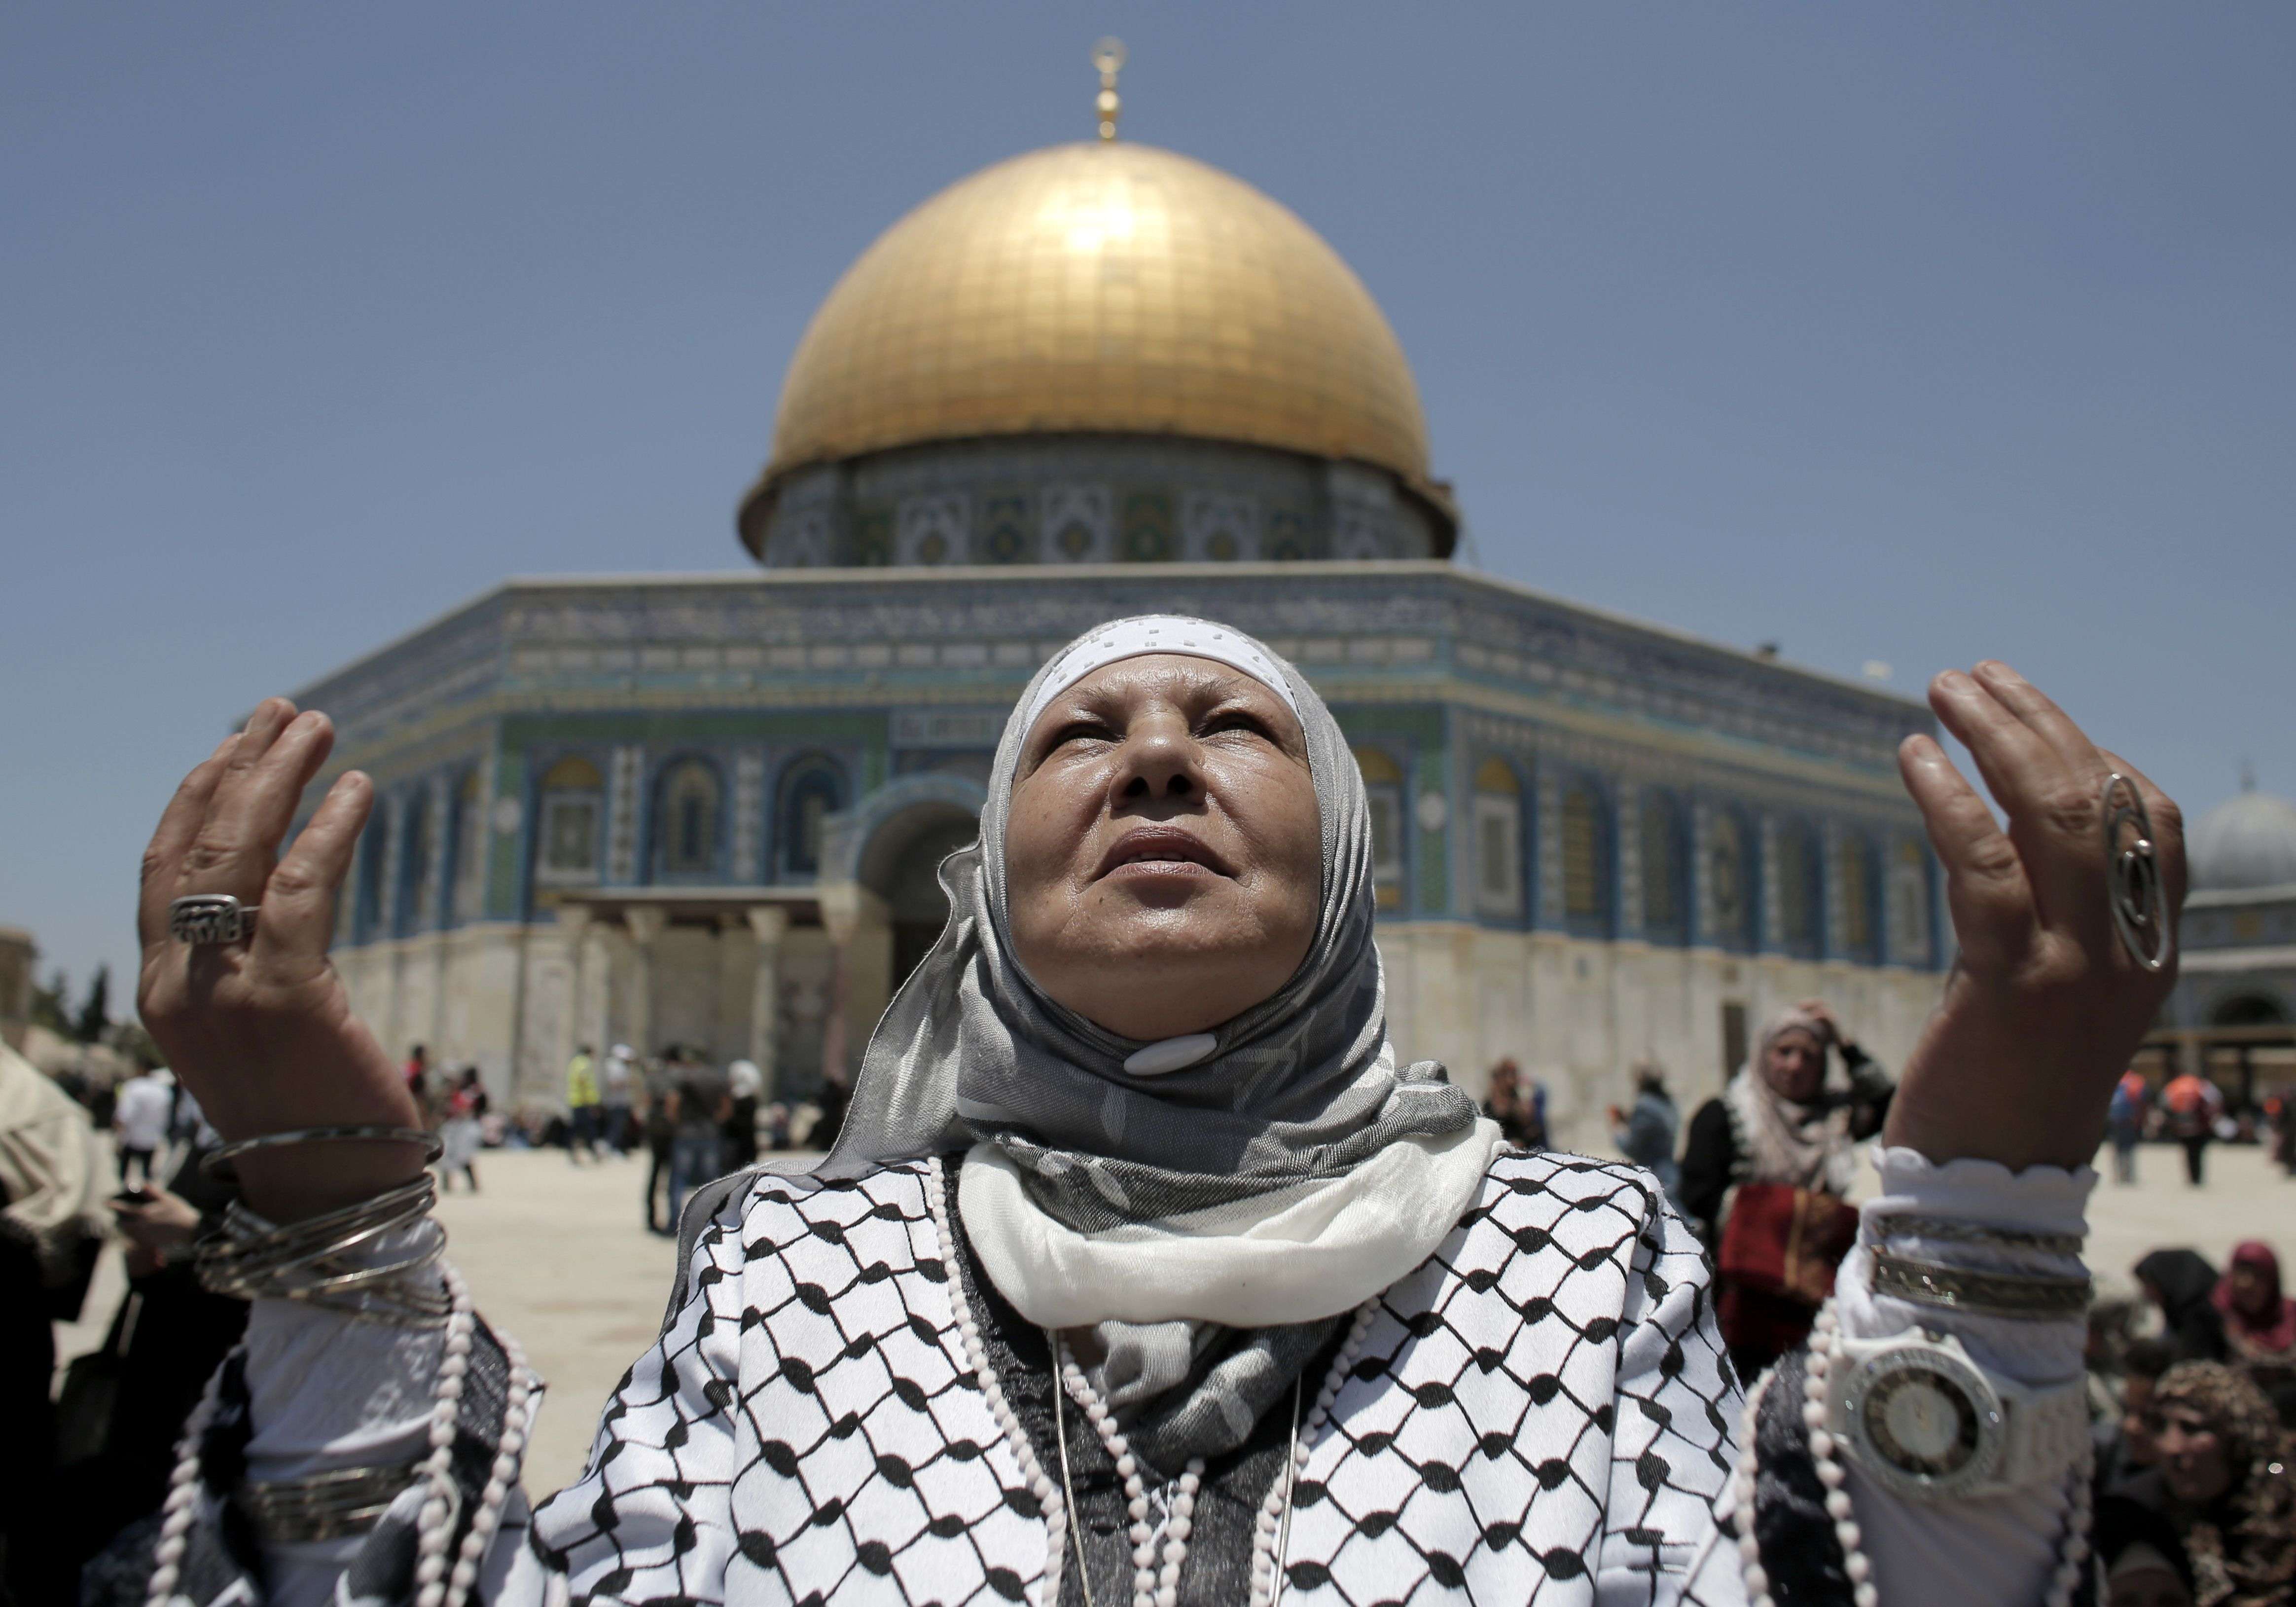 Palestinian women pray outside the Dome of the Rock at the Al-Aqsa Mosque compound in Jerusalem. (AFP PHOTO / AHMAD GHARABLI)